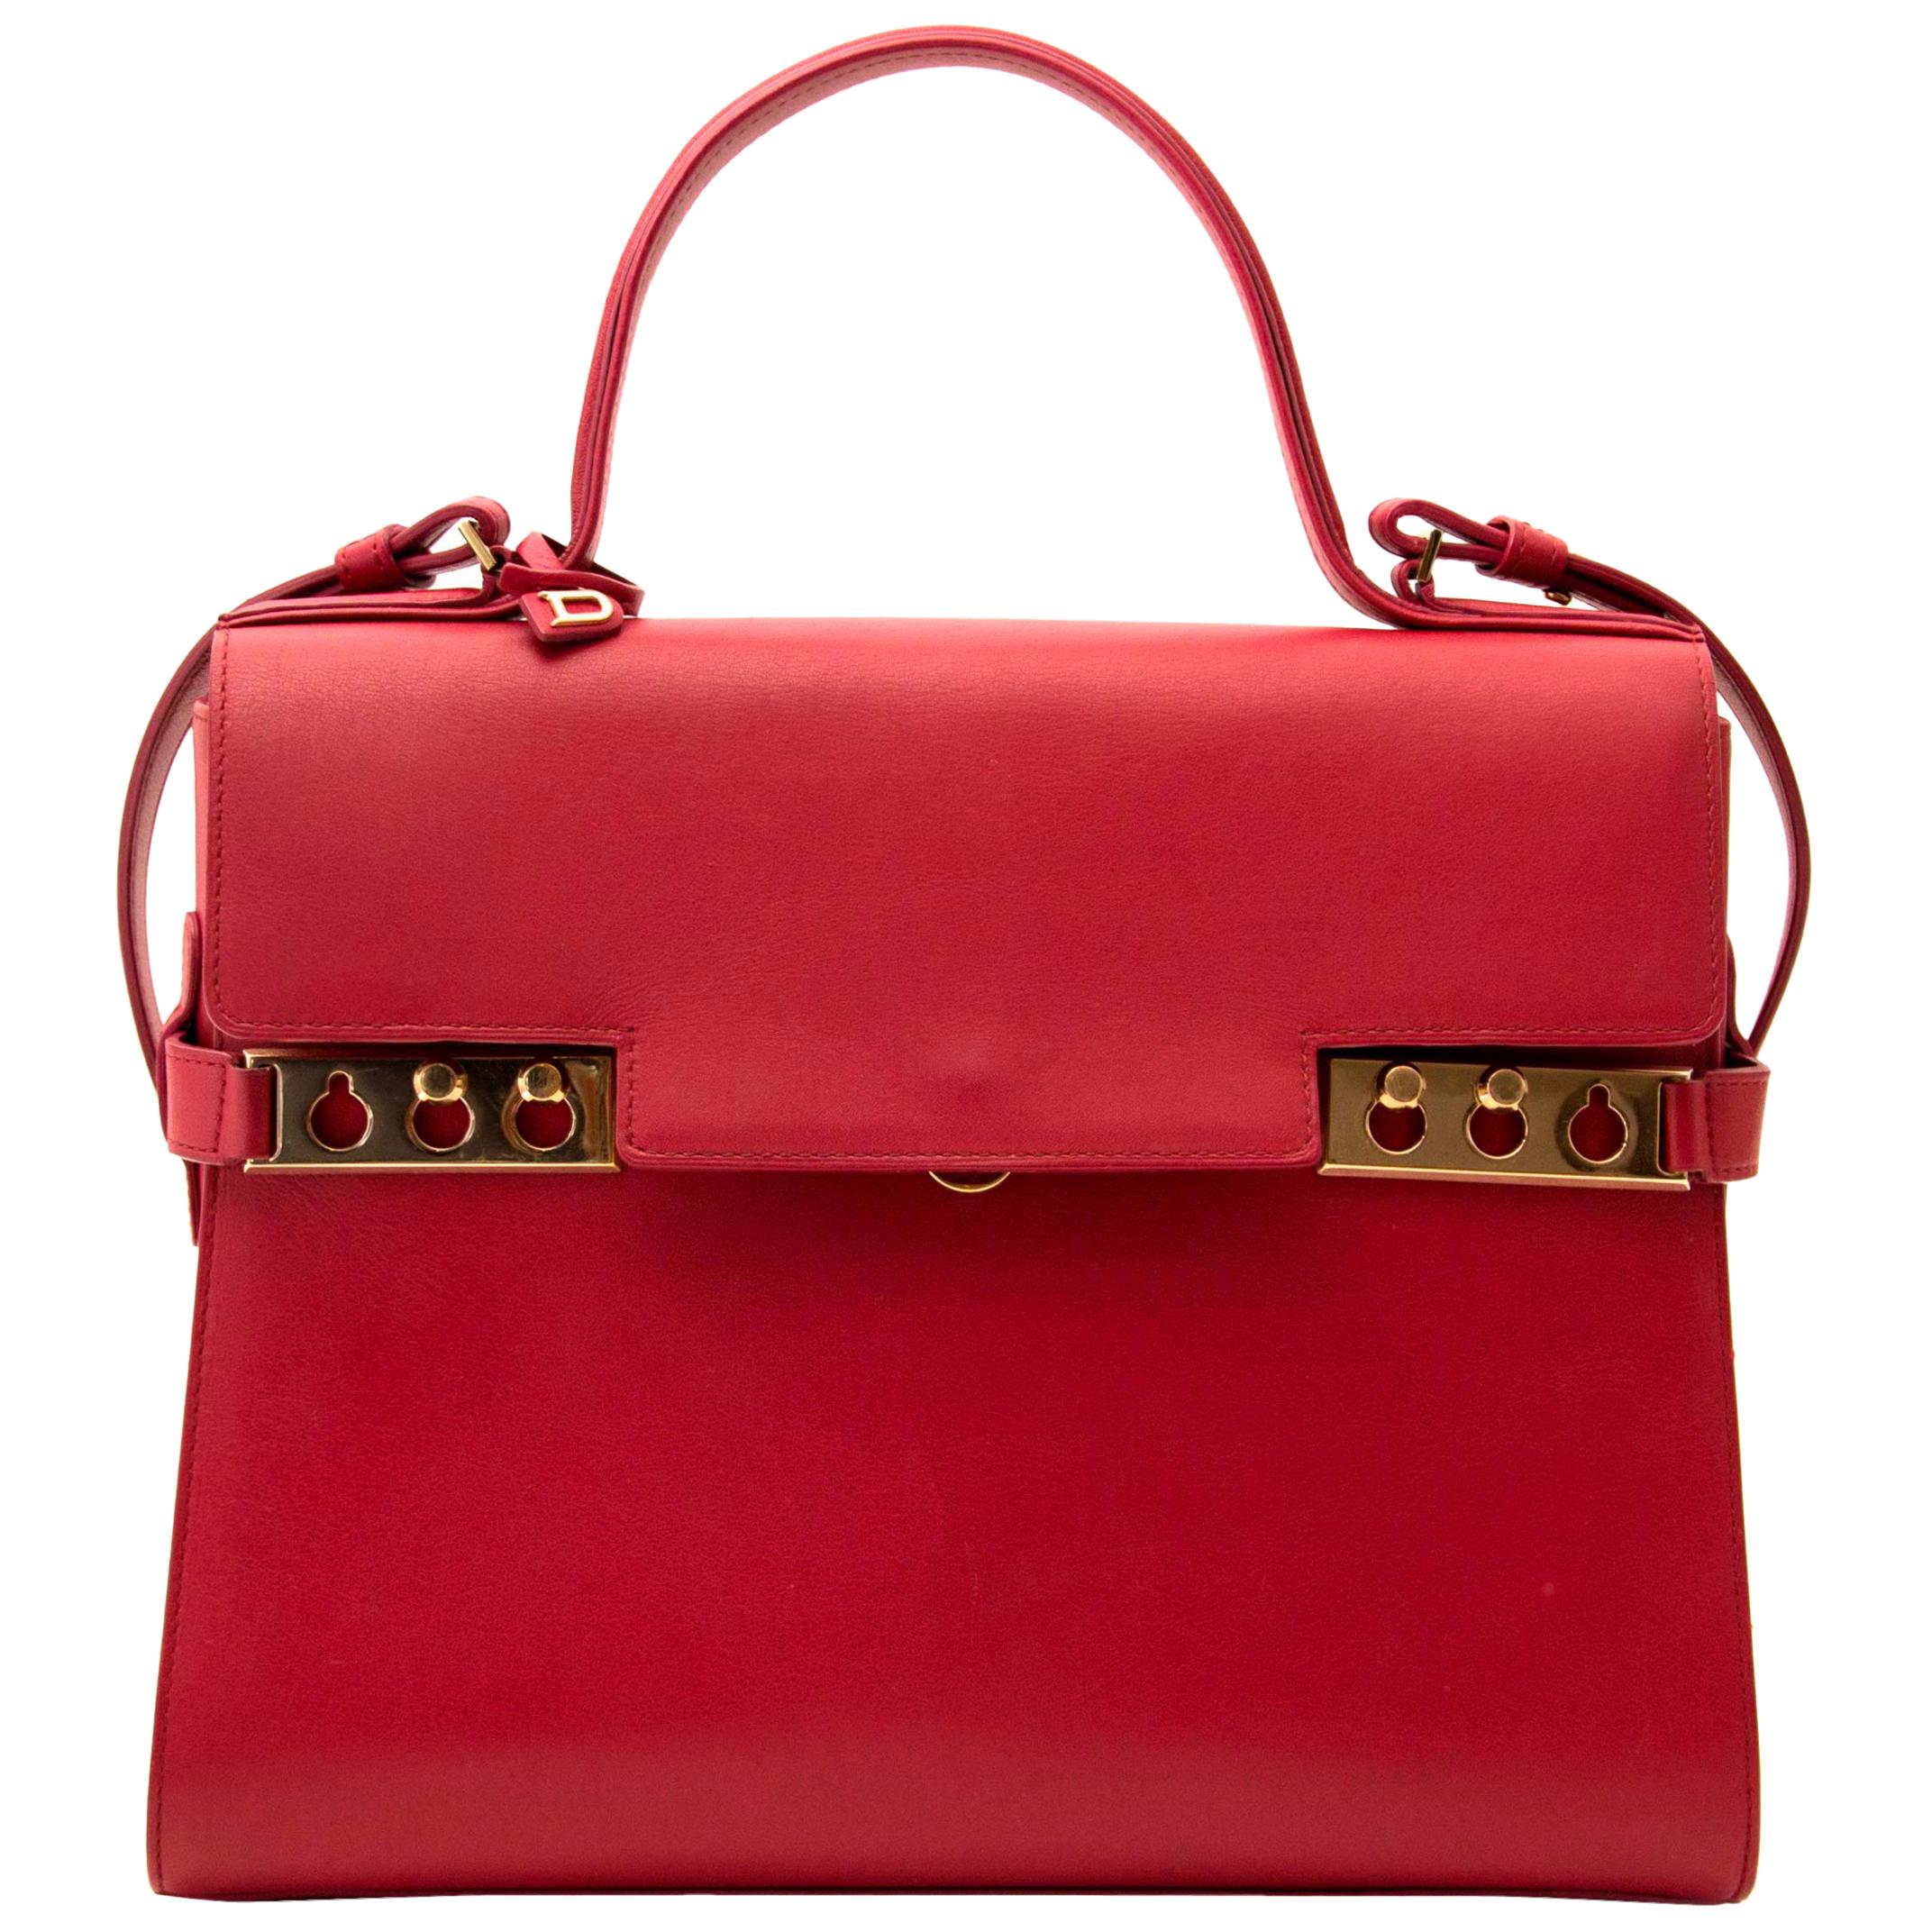 Delvaux Tempete - 3 For Sale on 1stDibs | delvaux tempete gm 